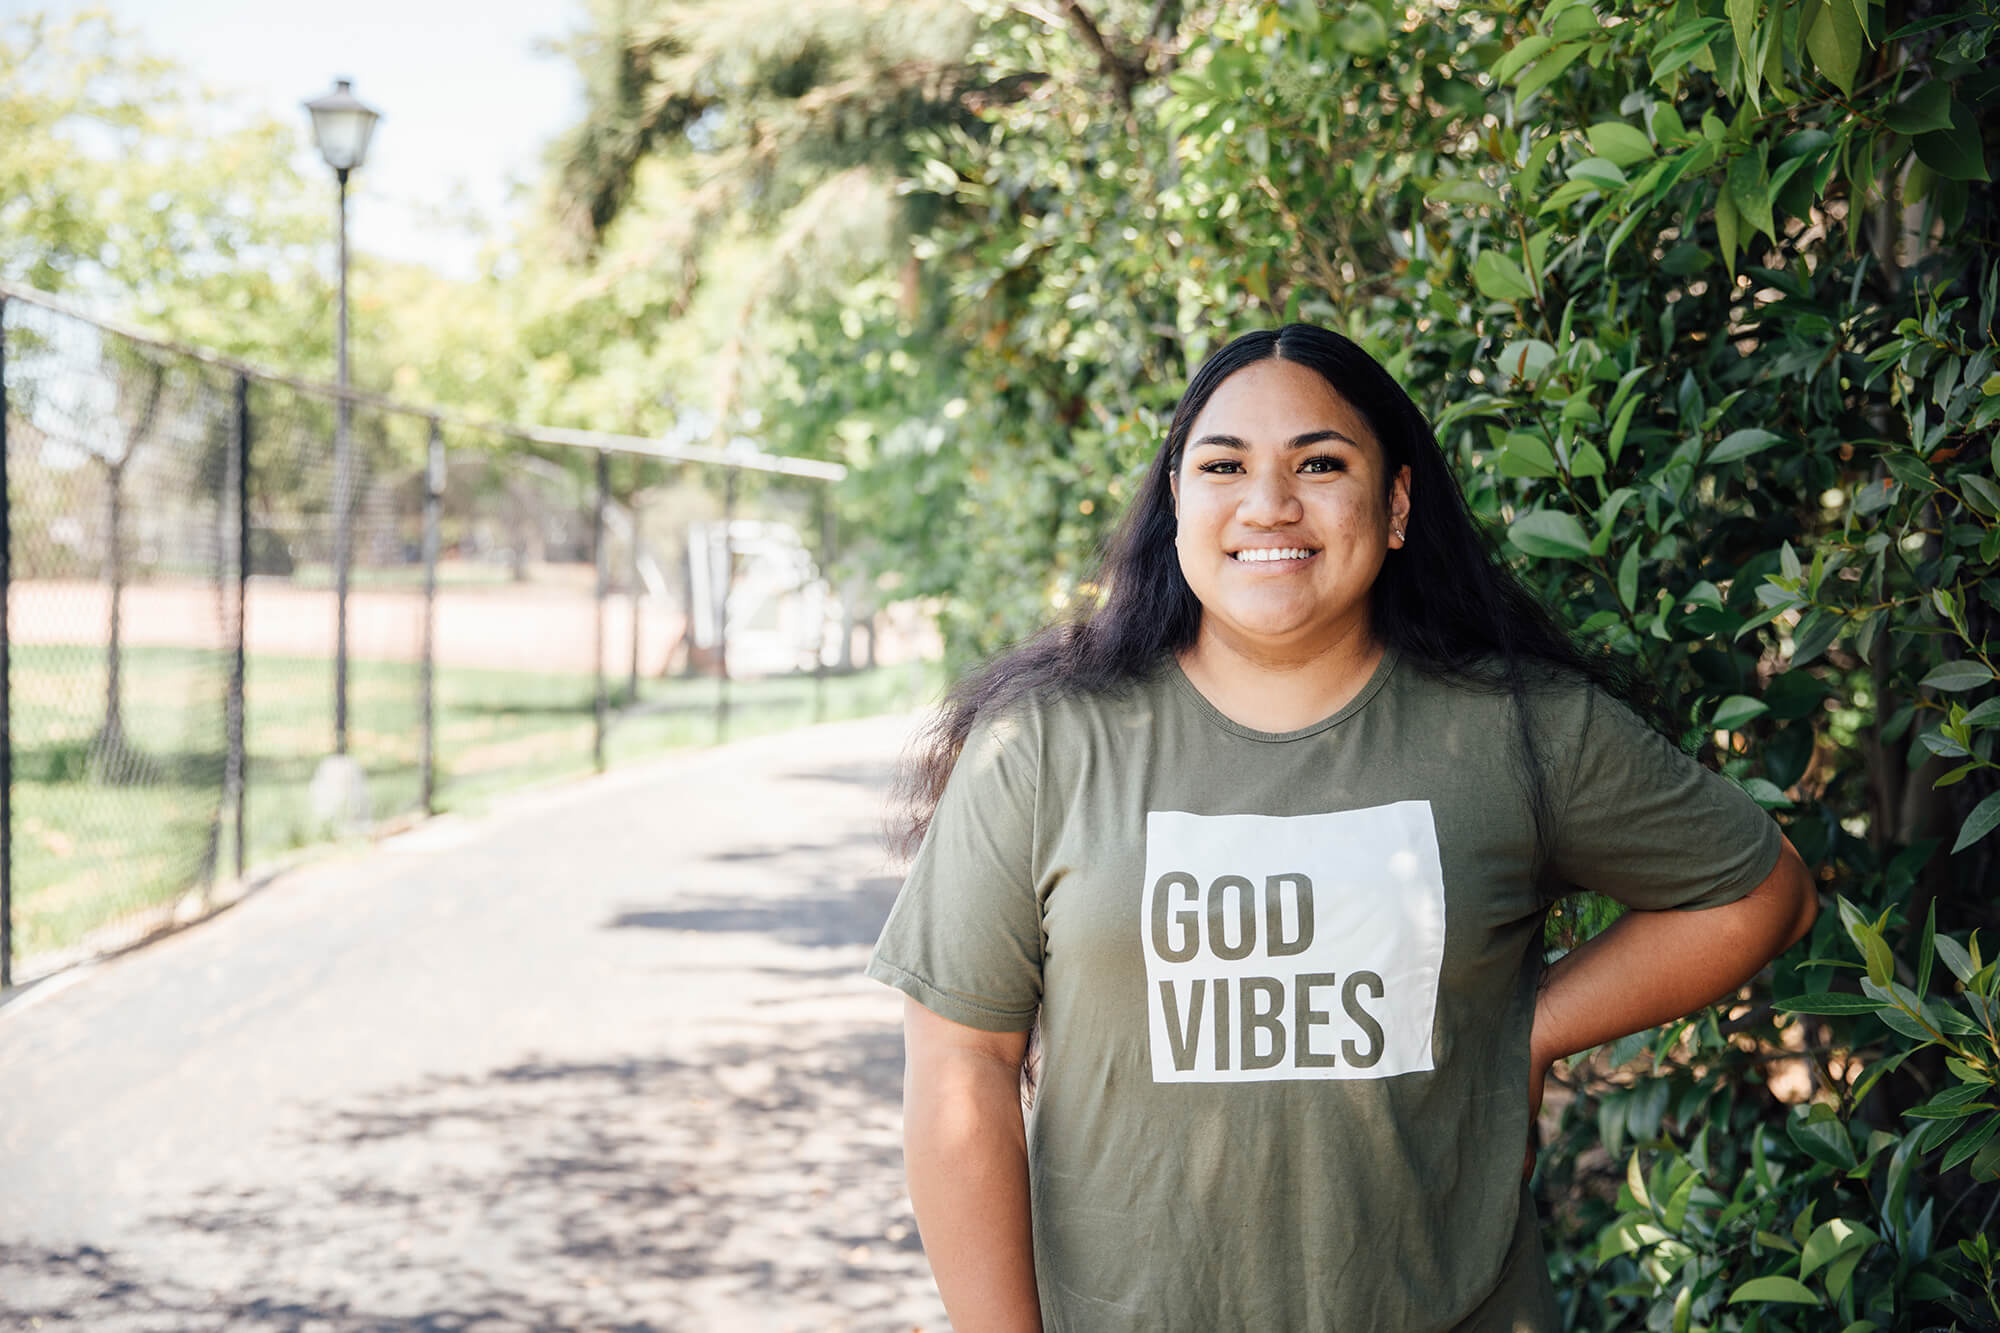 A woman smiles and wears a green shirt that says "God Vibes."